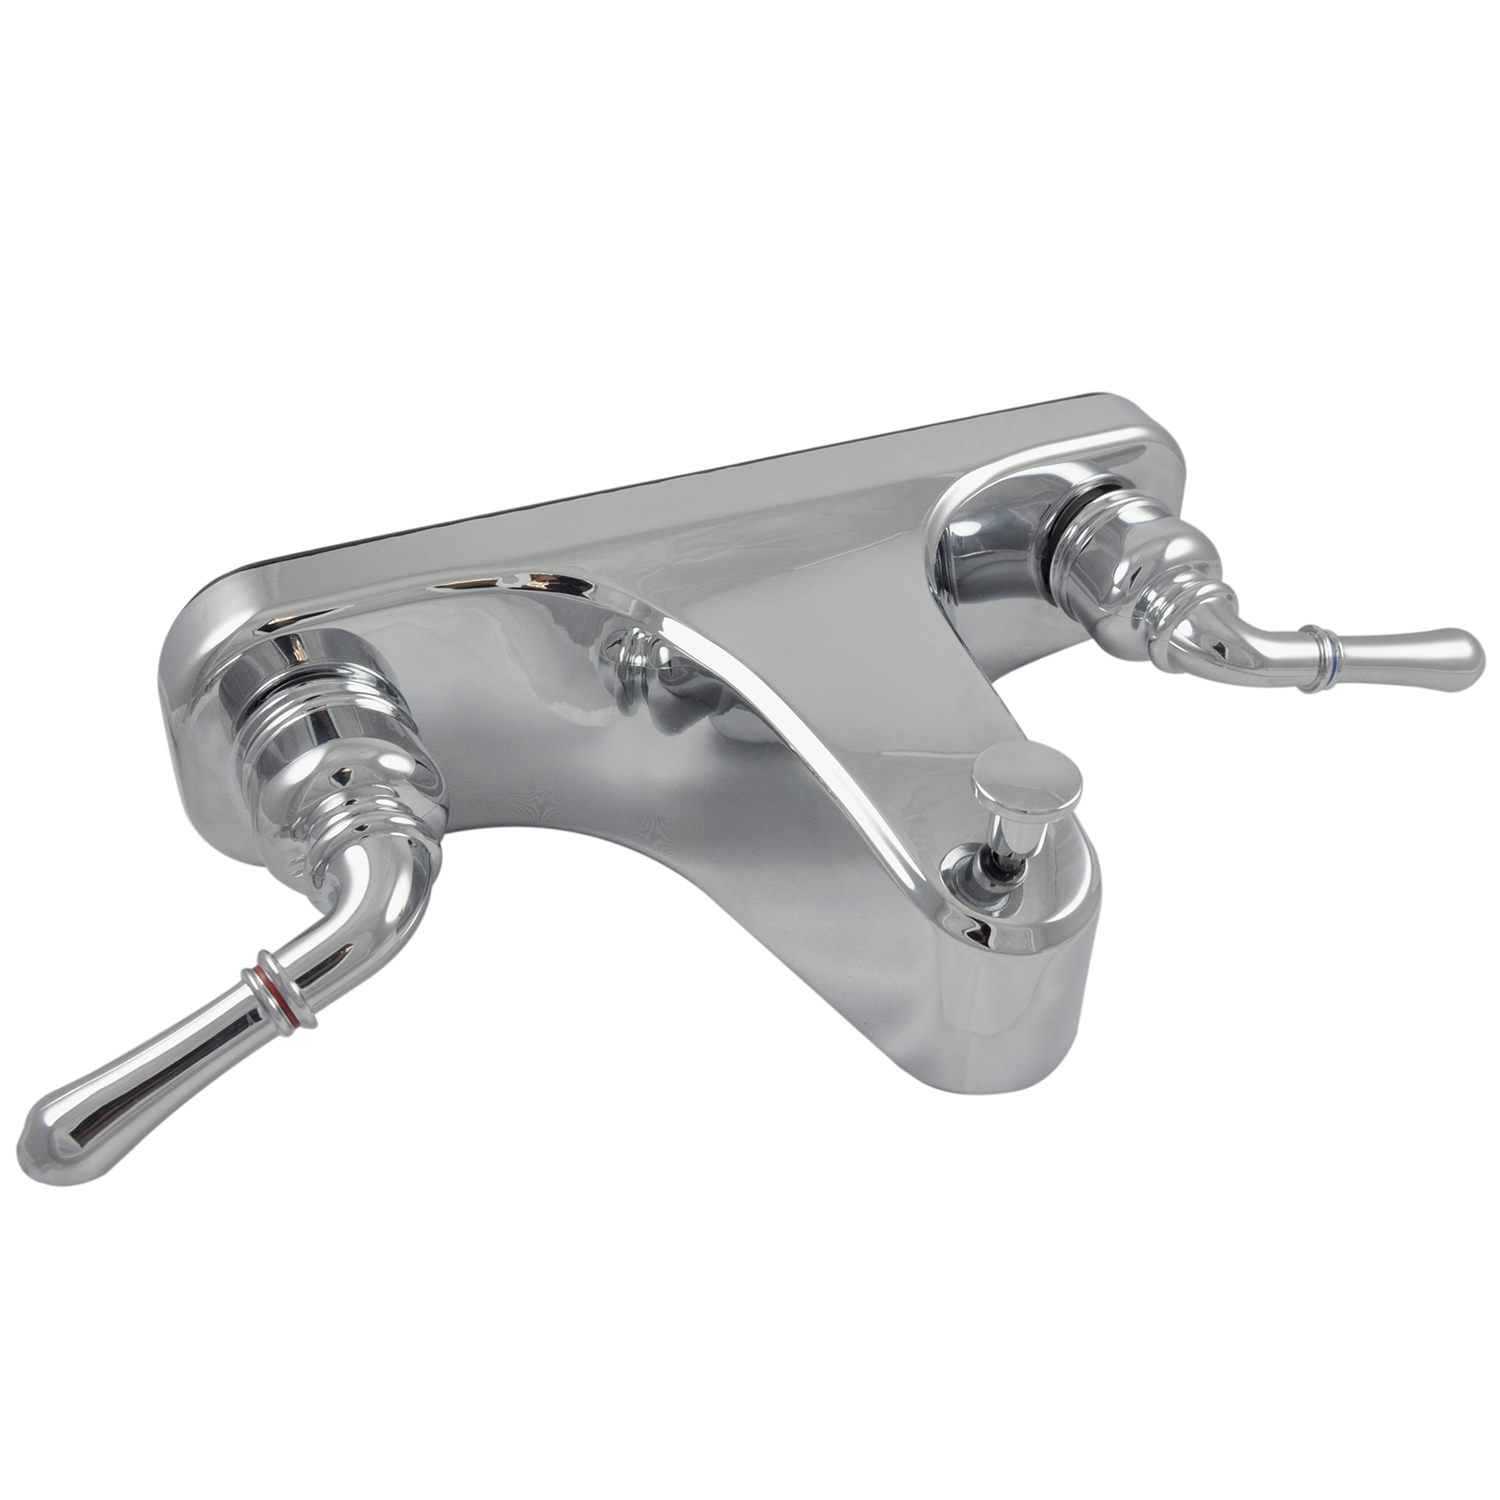 Mobile Home and RV 8 in. 2-Handle Tub and Shower Faucet in Chrome